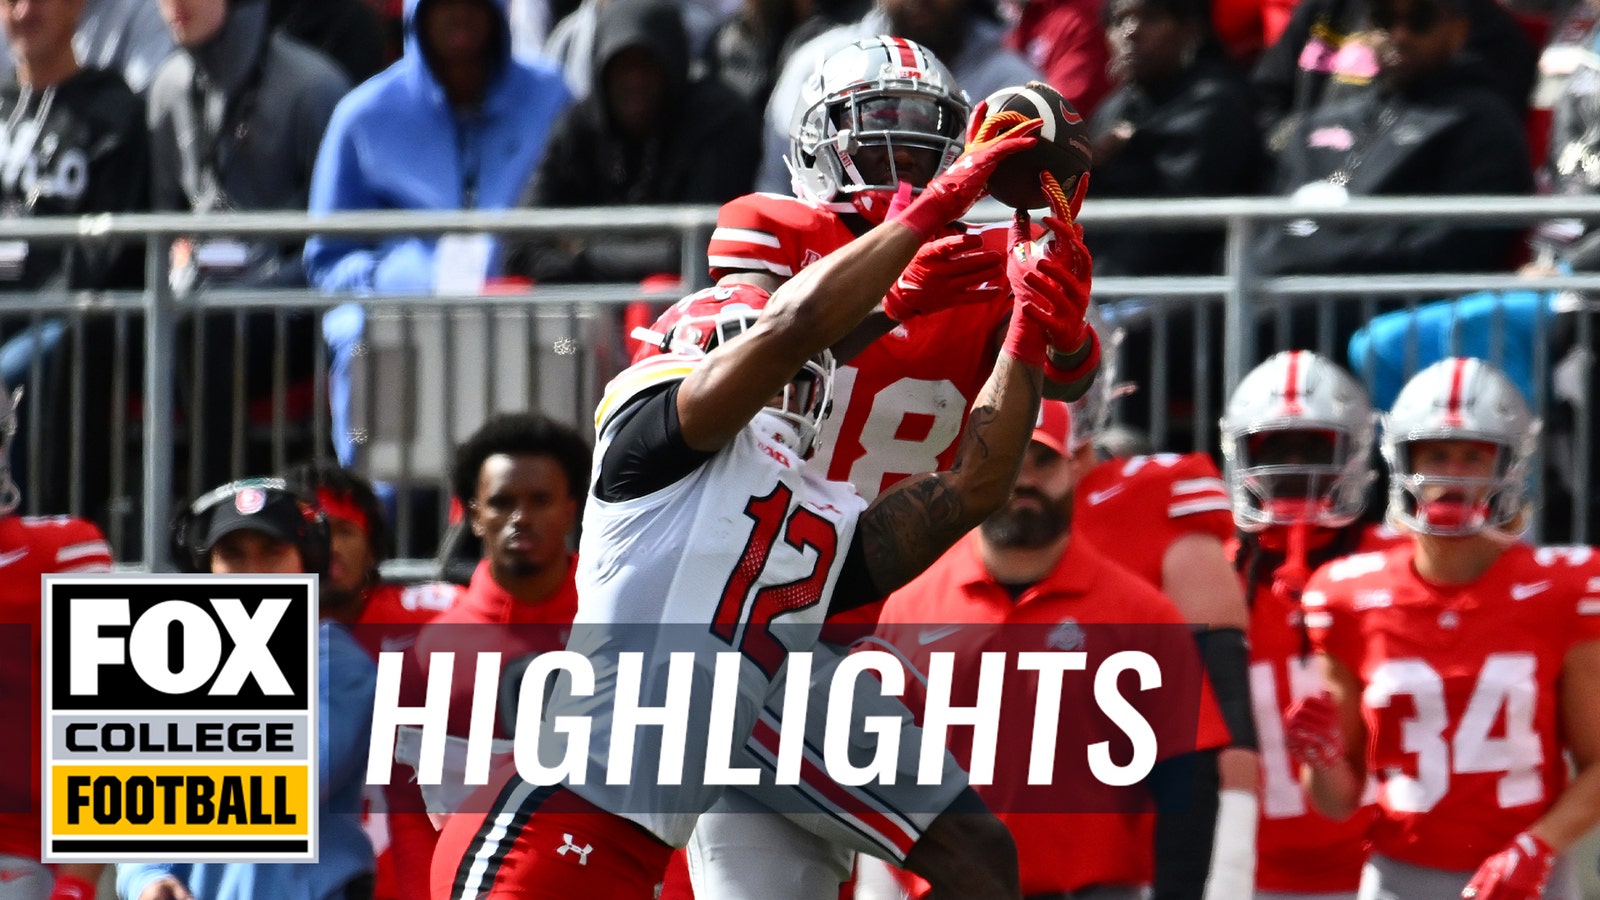 Highlights: See how No. 4 Ohio State pulled away vs. Maryland